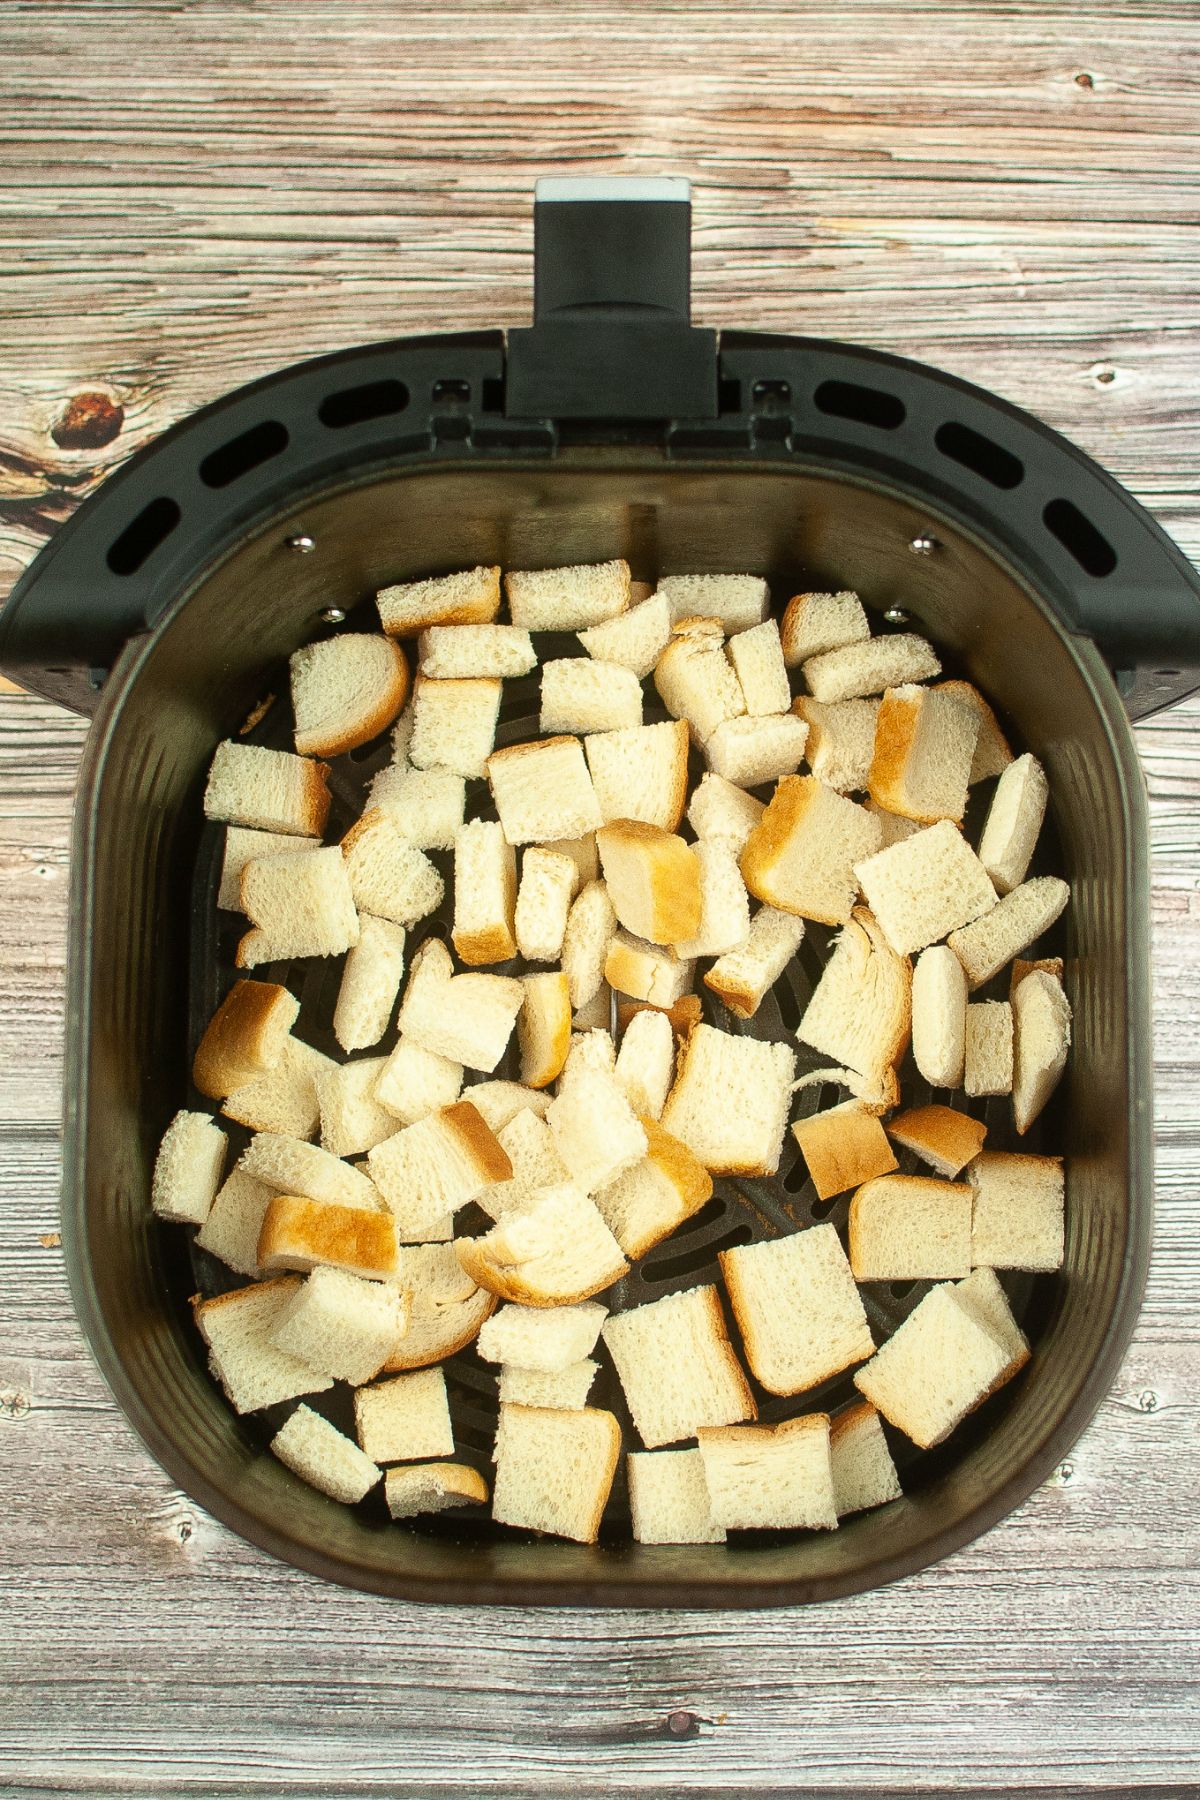 cubed slices of bread in an air fryer basket